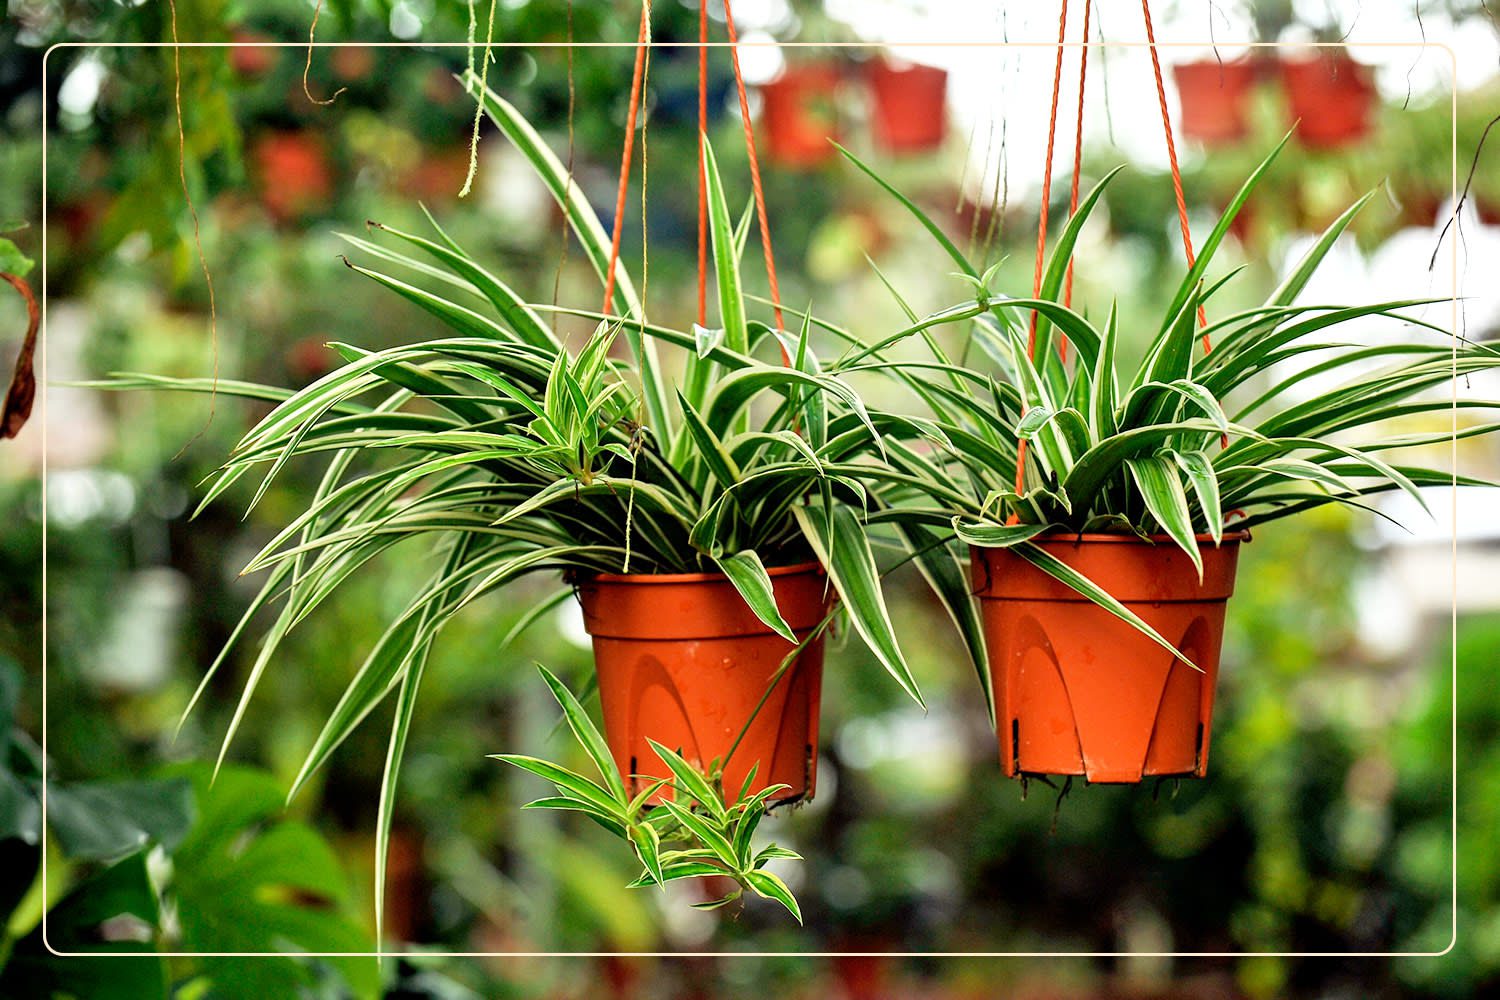 two Spider Plants (Chlorophytum comosum), which are nontoxic plants to pets, hang side-by-side in terracotta-colored pots